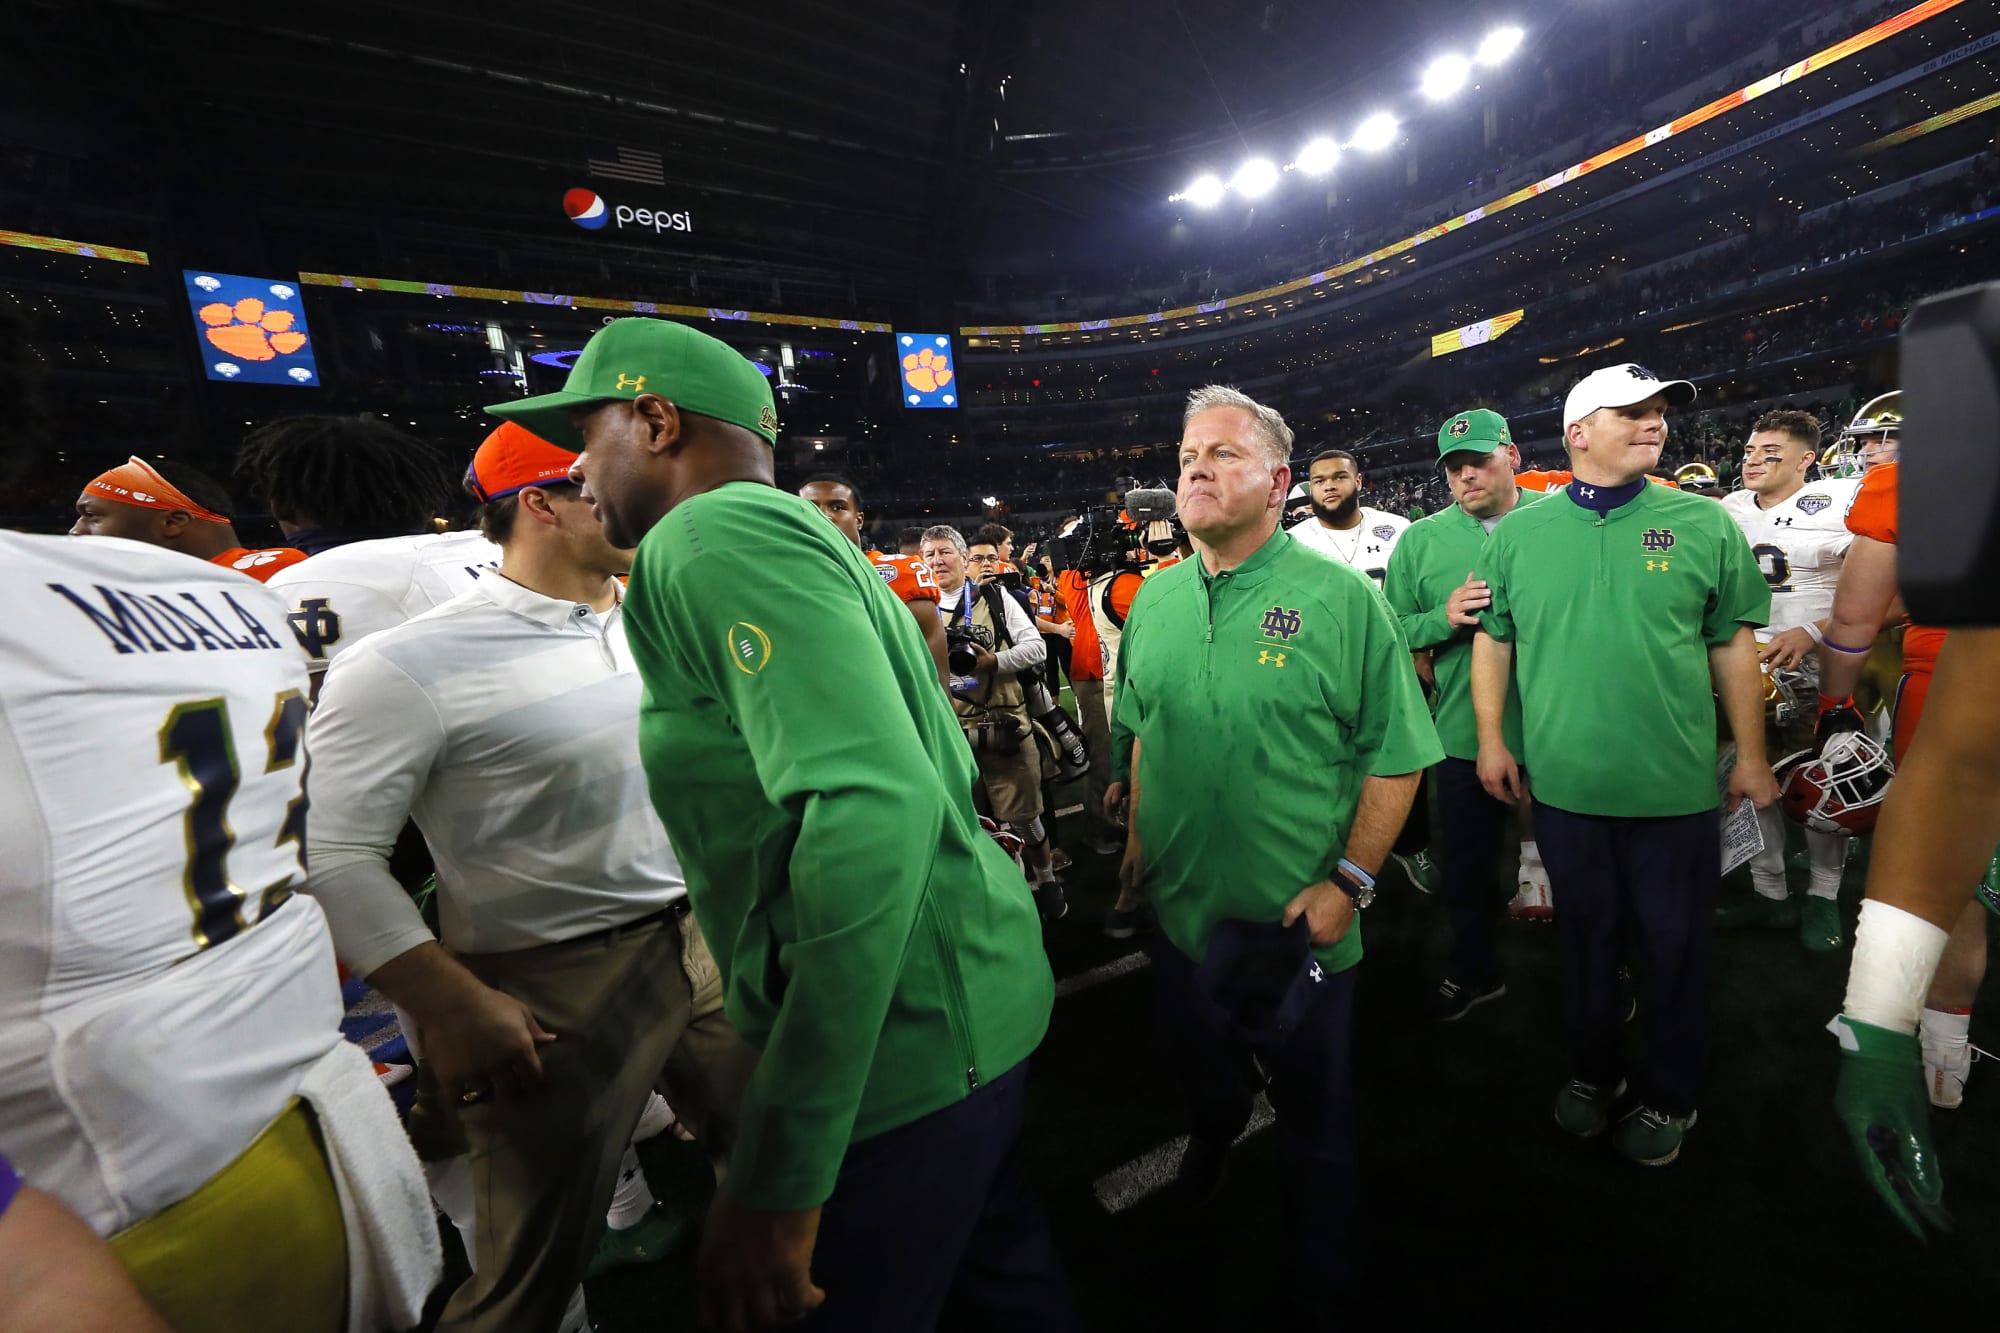 Could 2019 Be a Turning Point for Notre Dame Football?